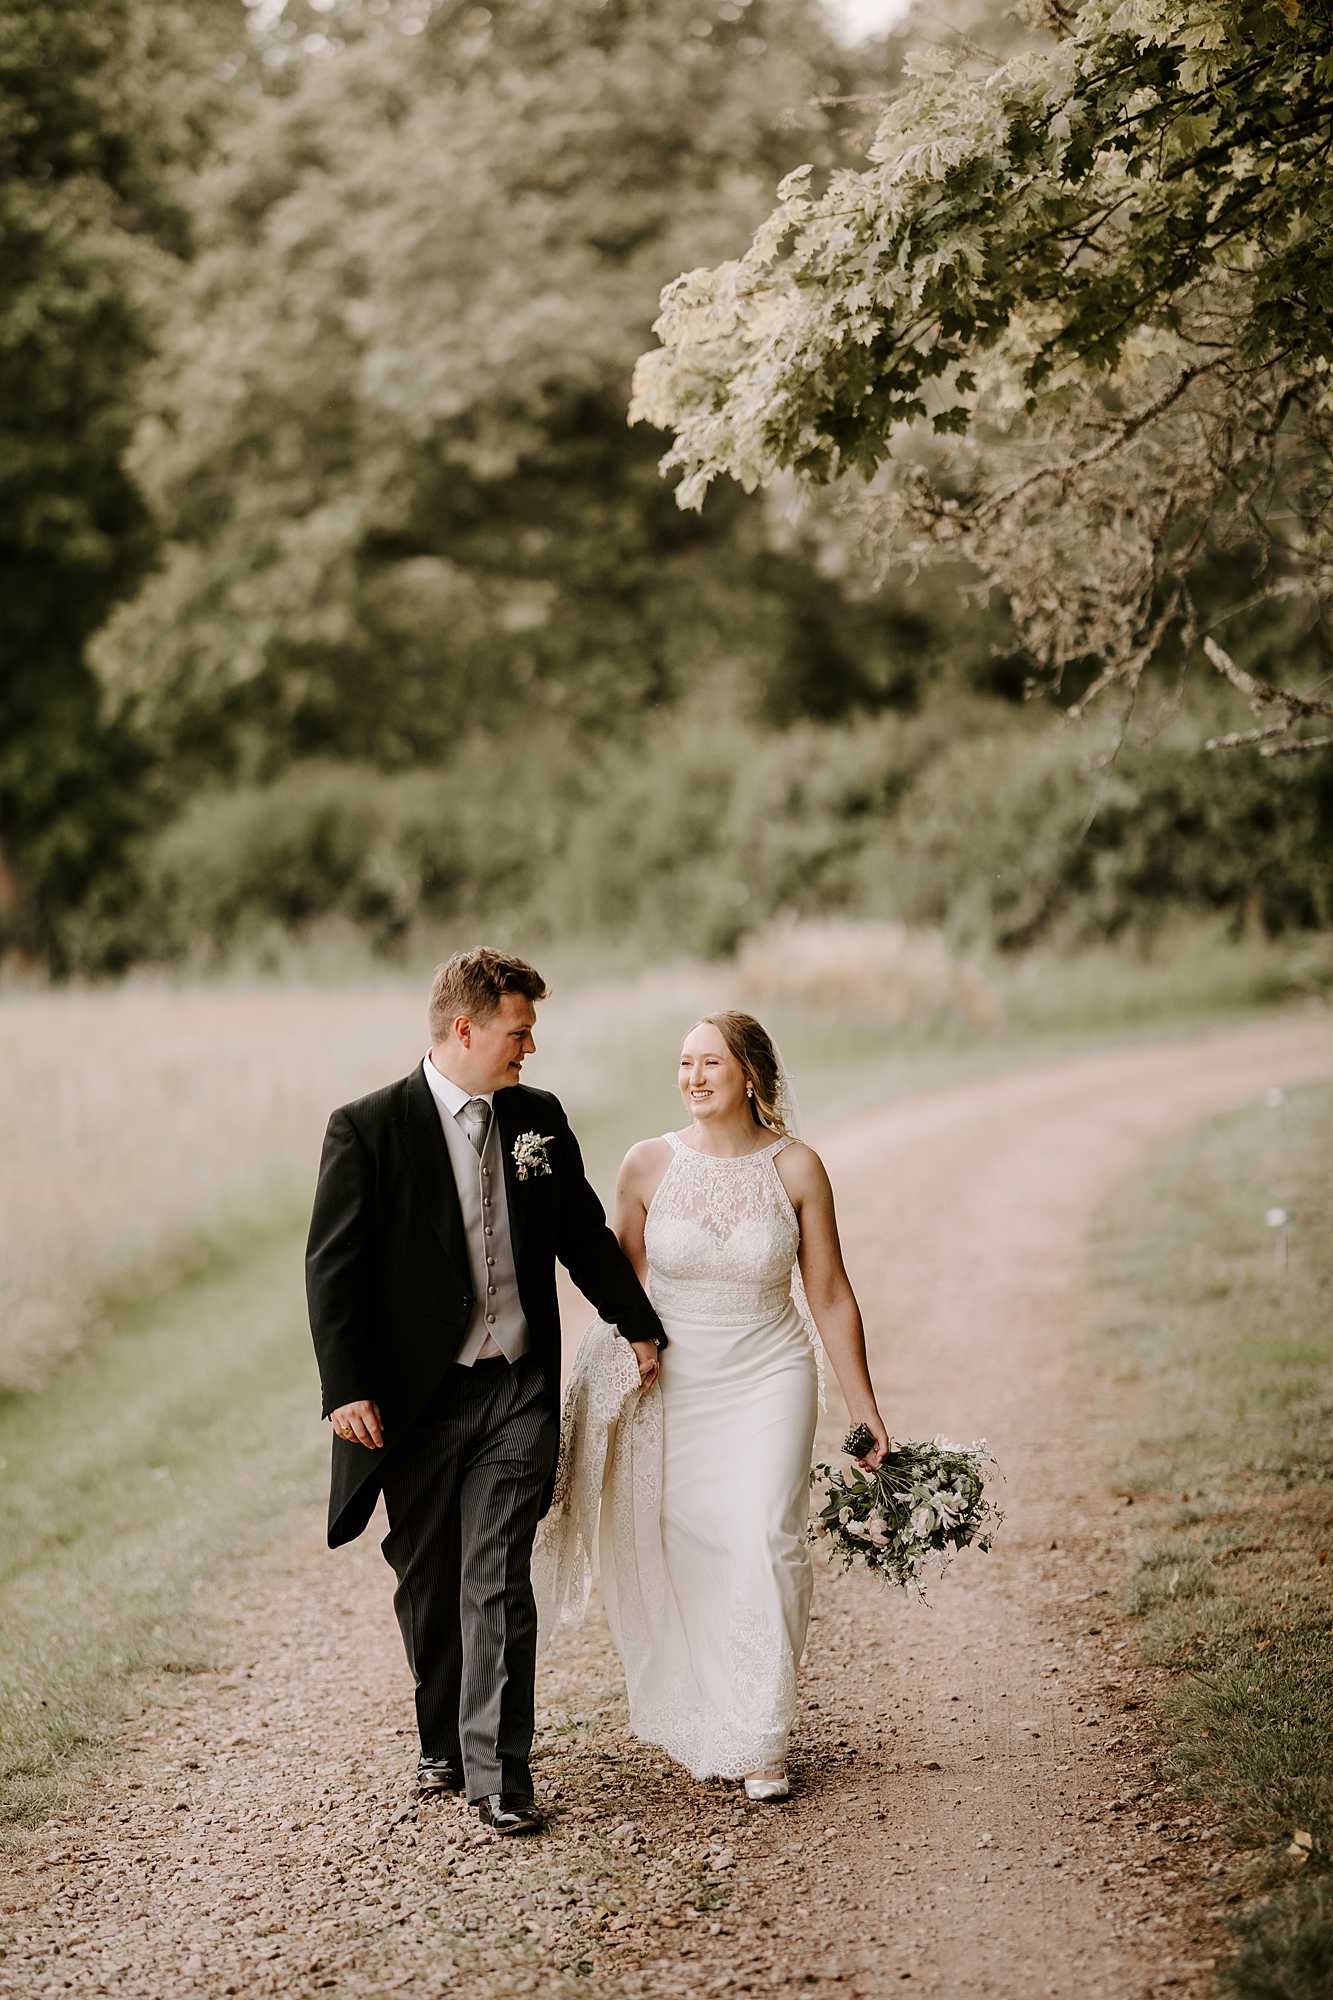 Holywell Estate wedding with Luxury and Chris